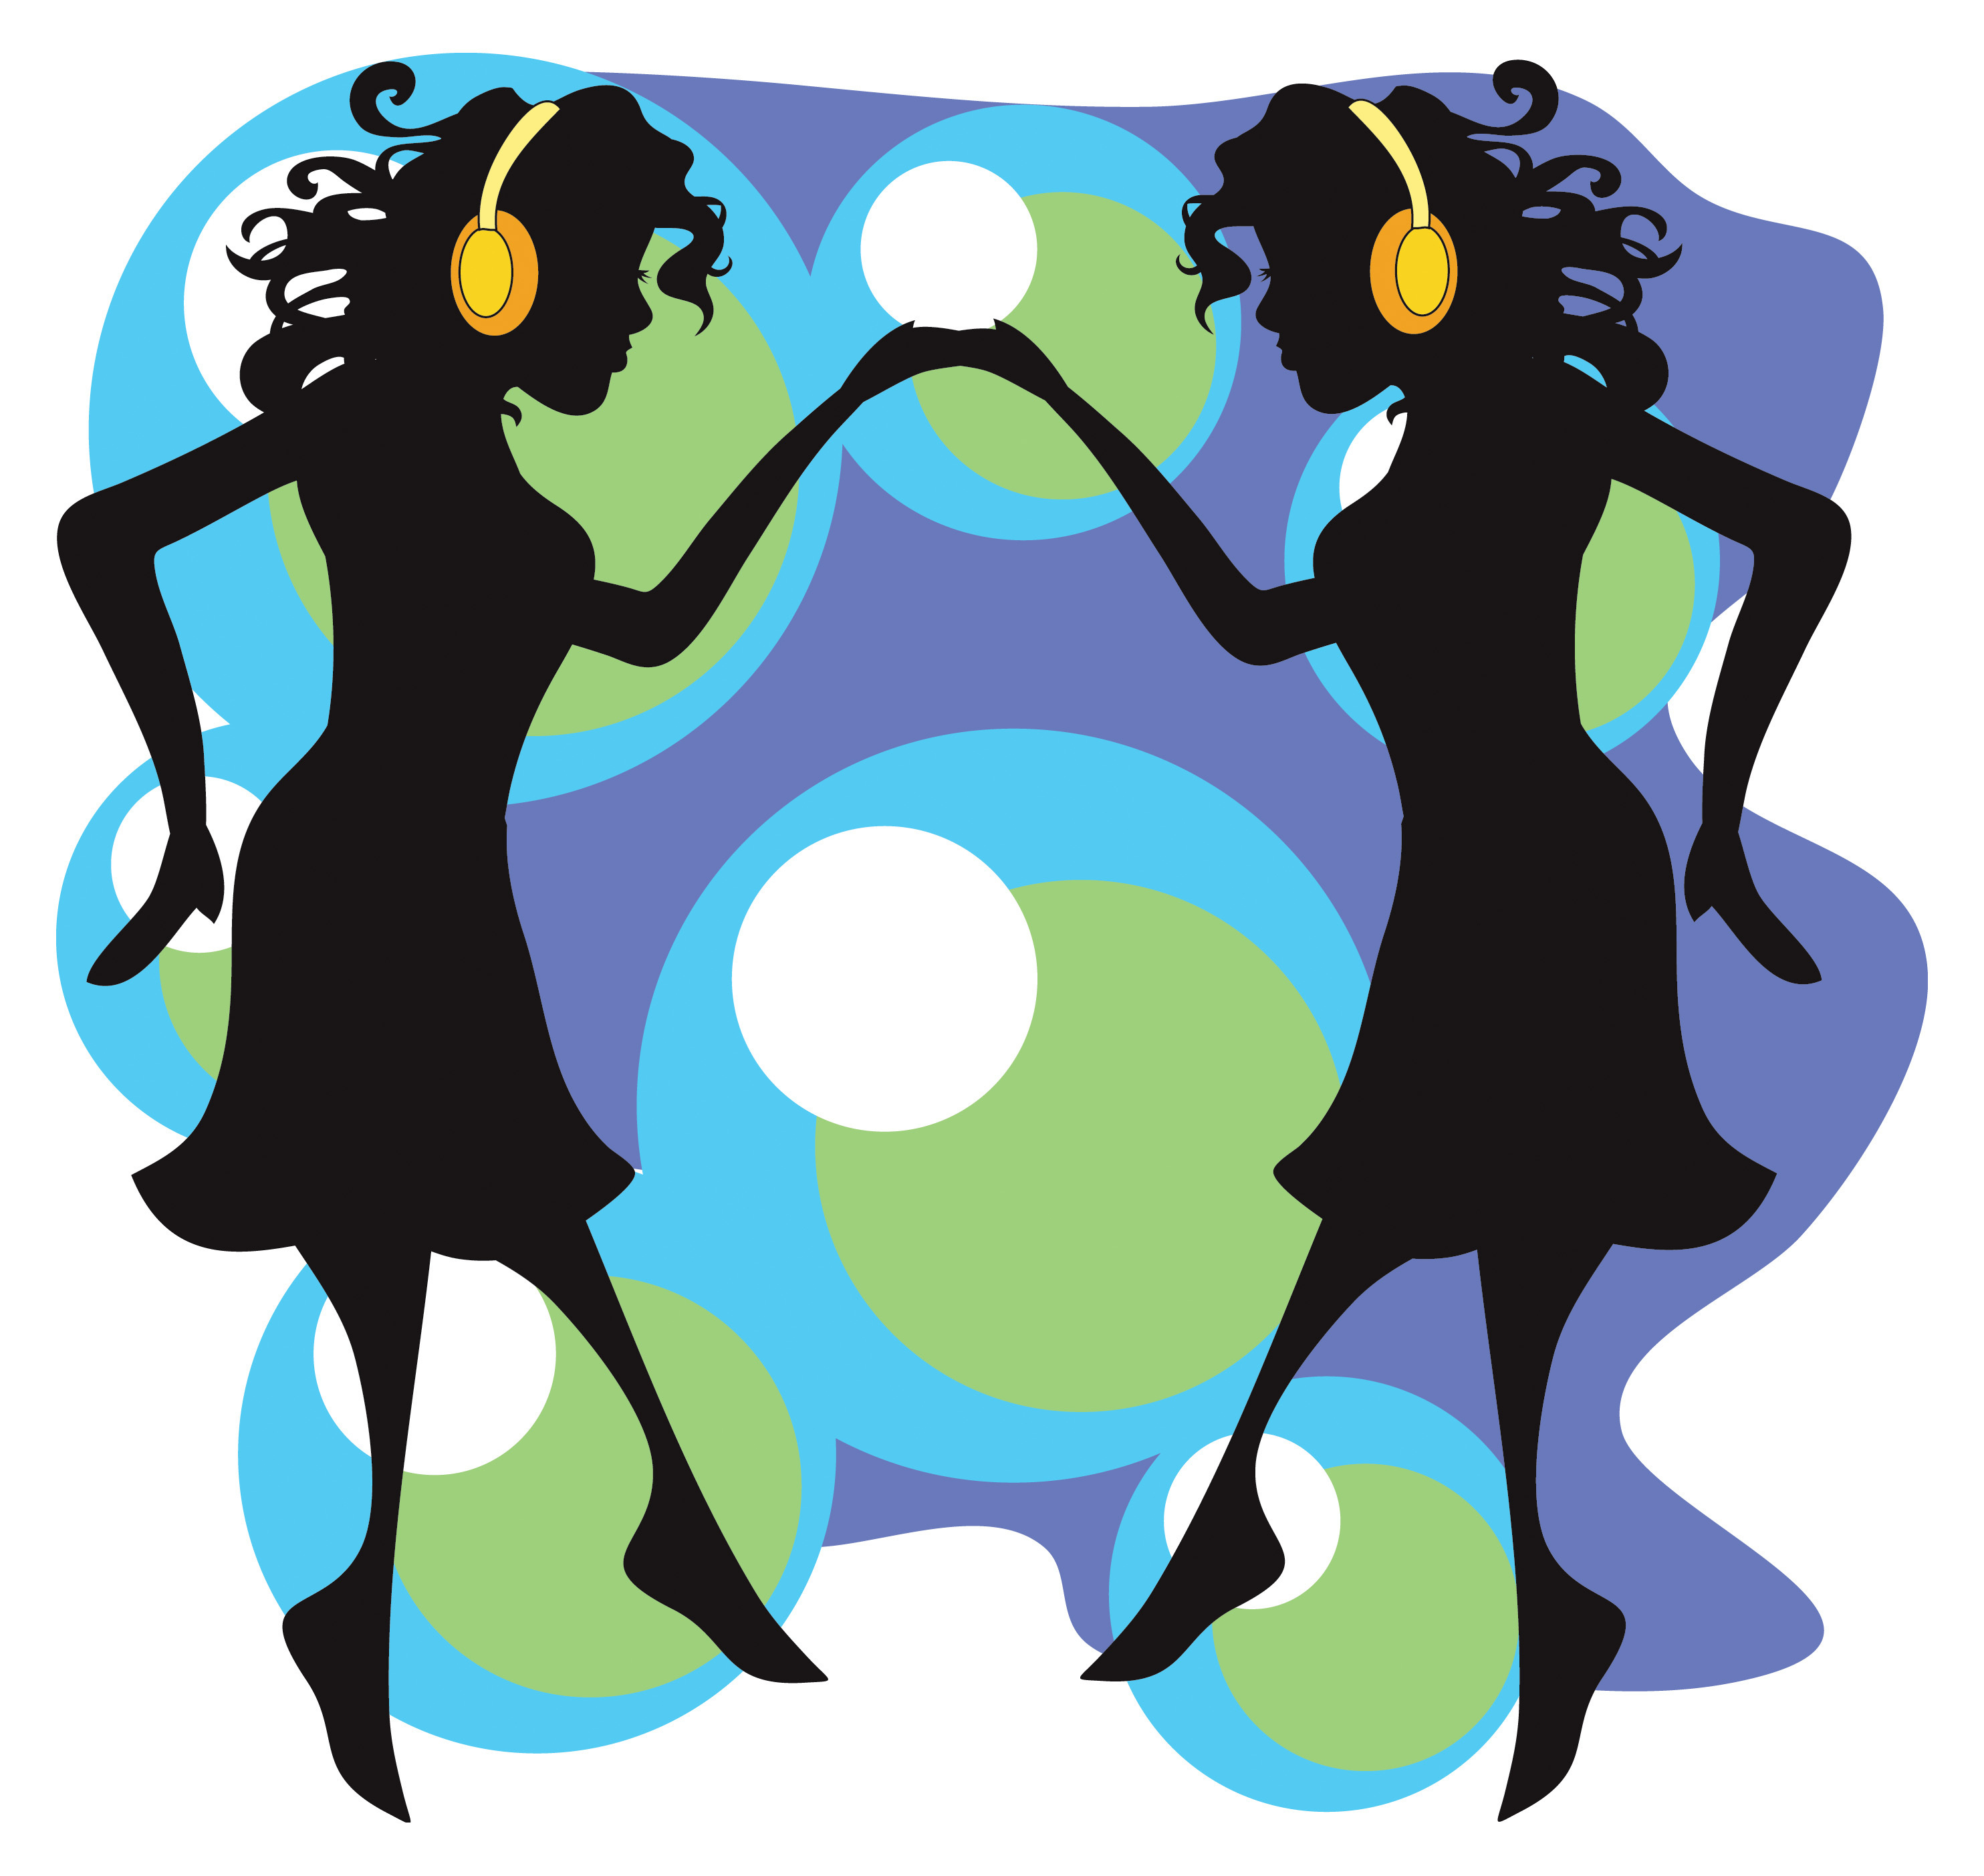 Picture Of Someone Dancing - ClipArt Best